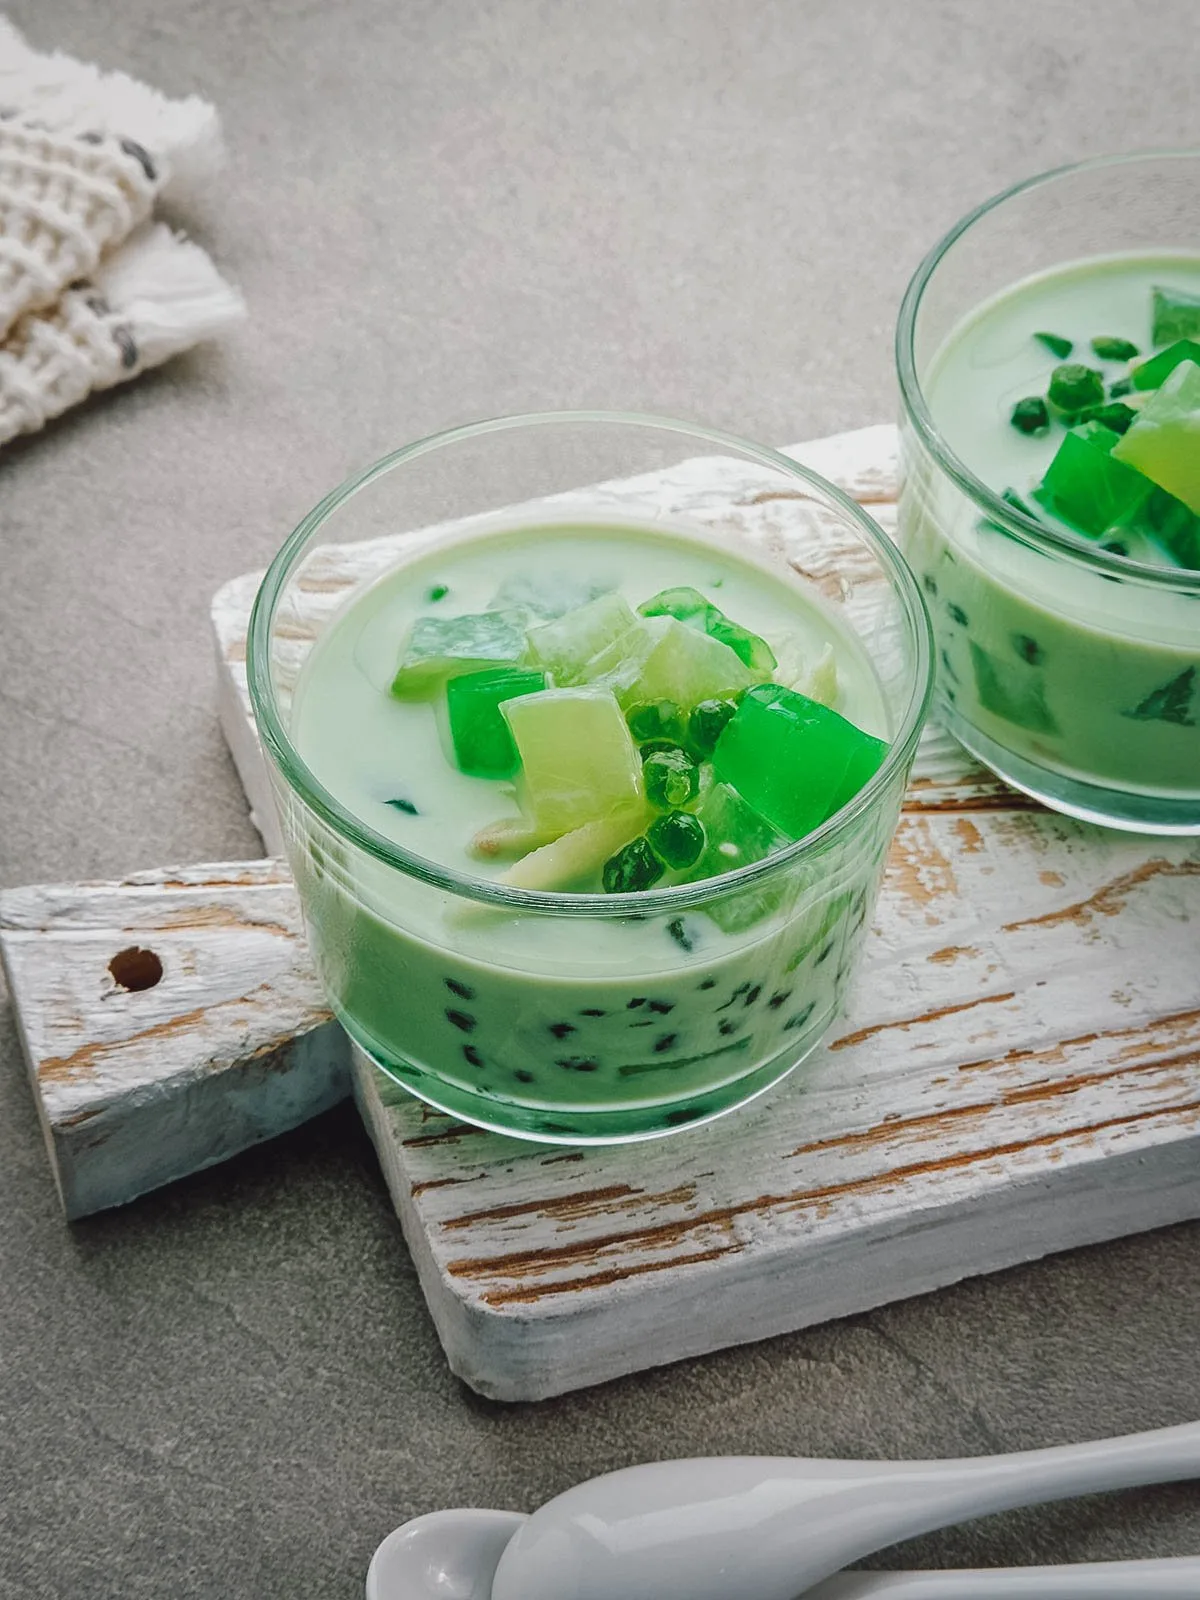 Glasses of buko pandan, a refreshing dessert made with shredded coconut, pandan, and sweetened condensed milk